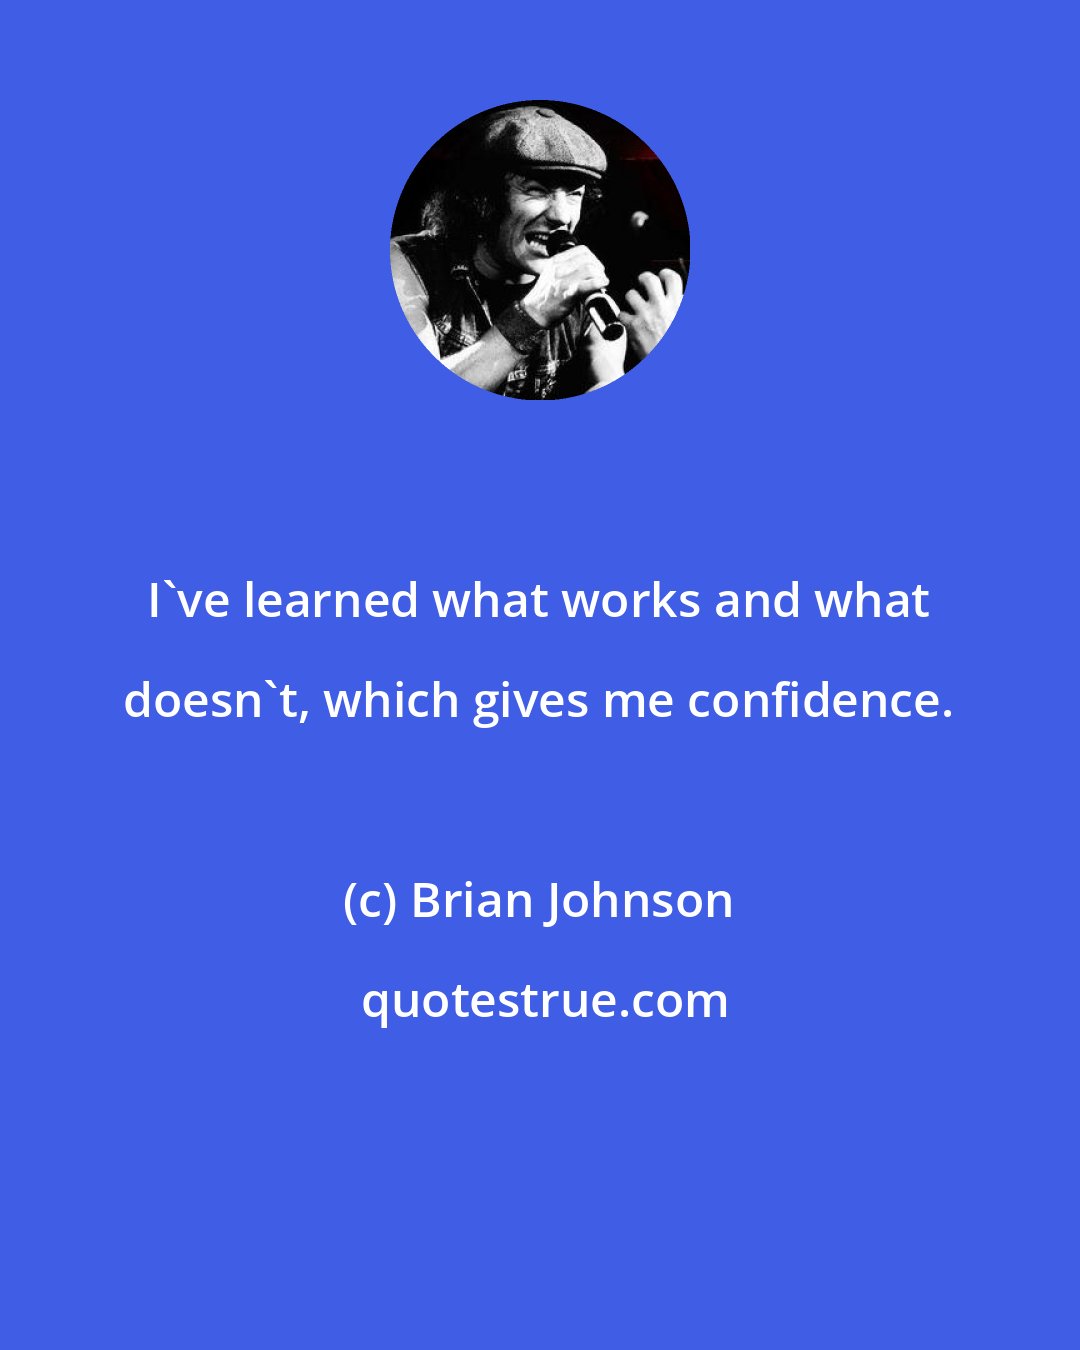 Brian Johnson: I've learned what works and what doesn't, which gives me confidence.